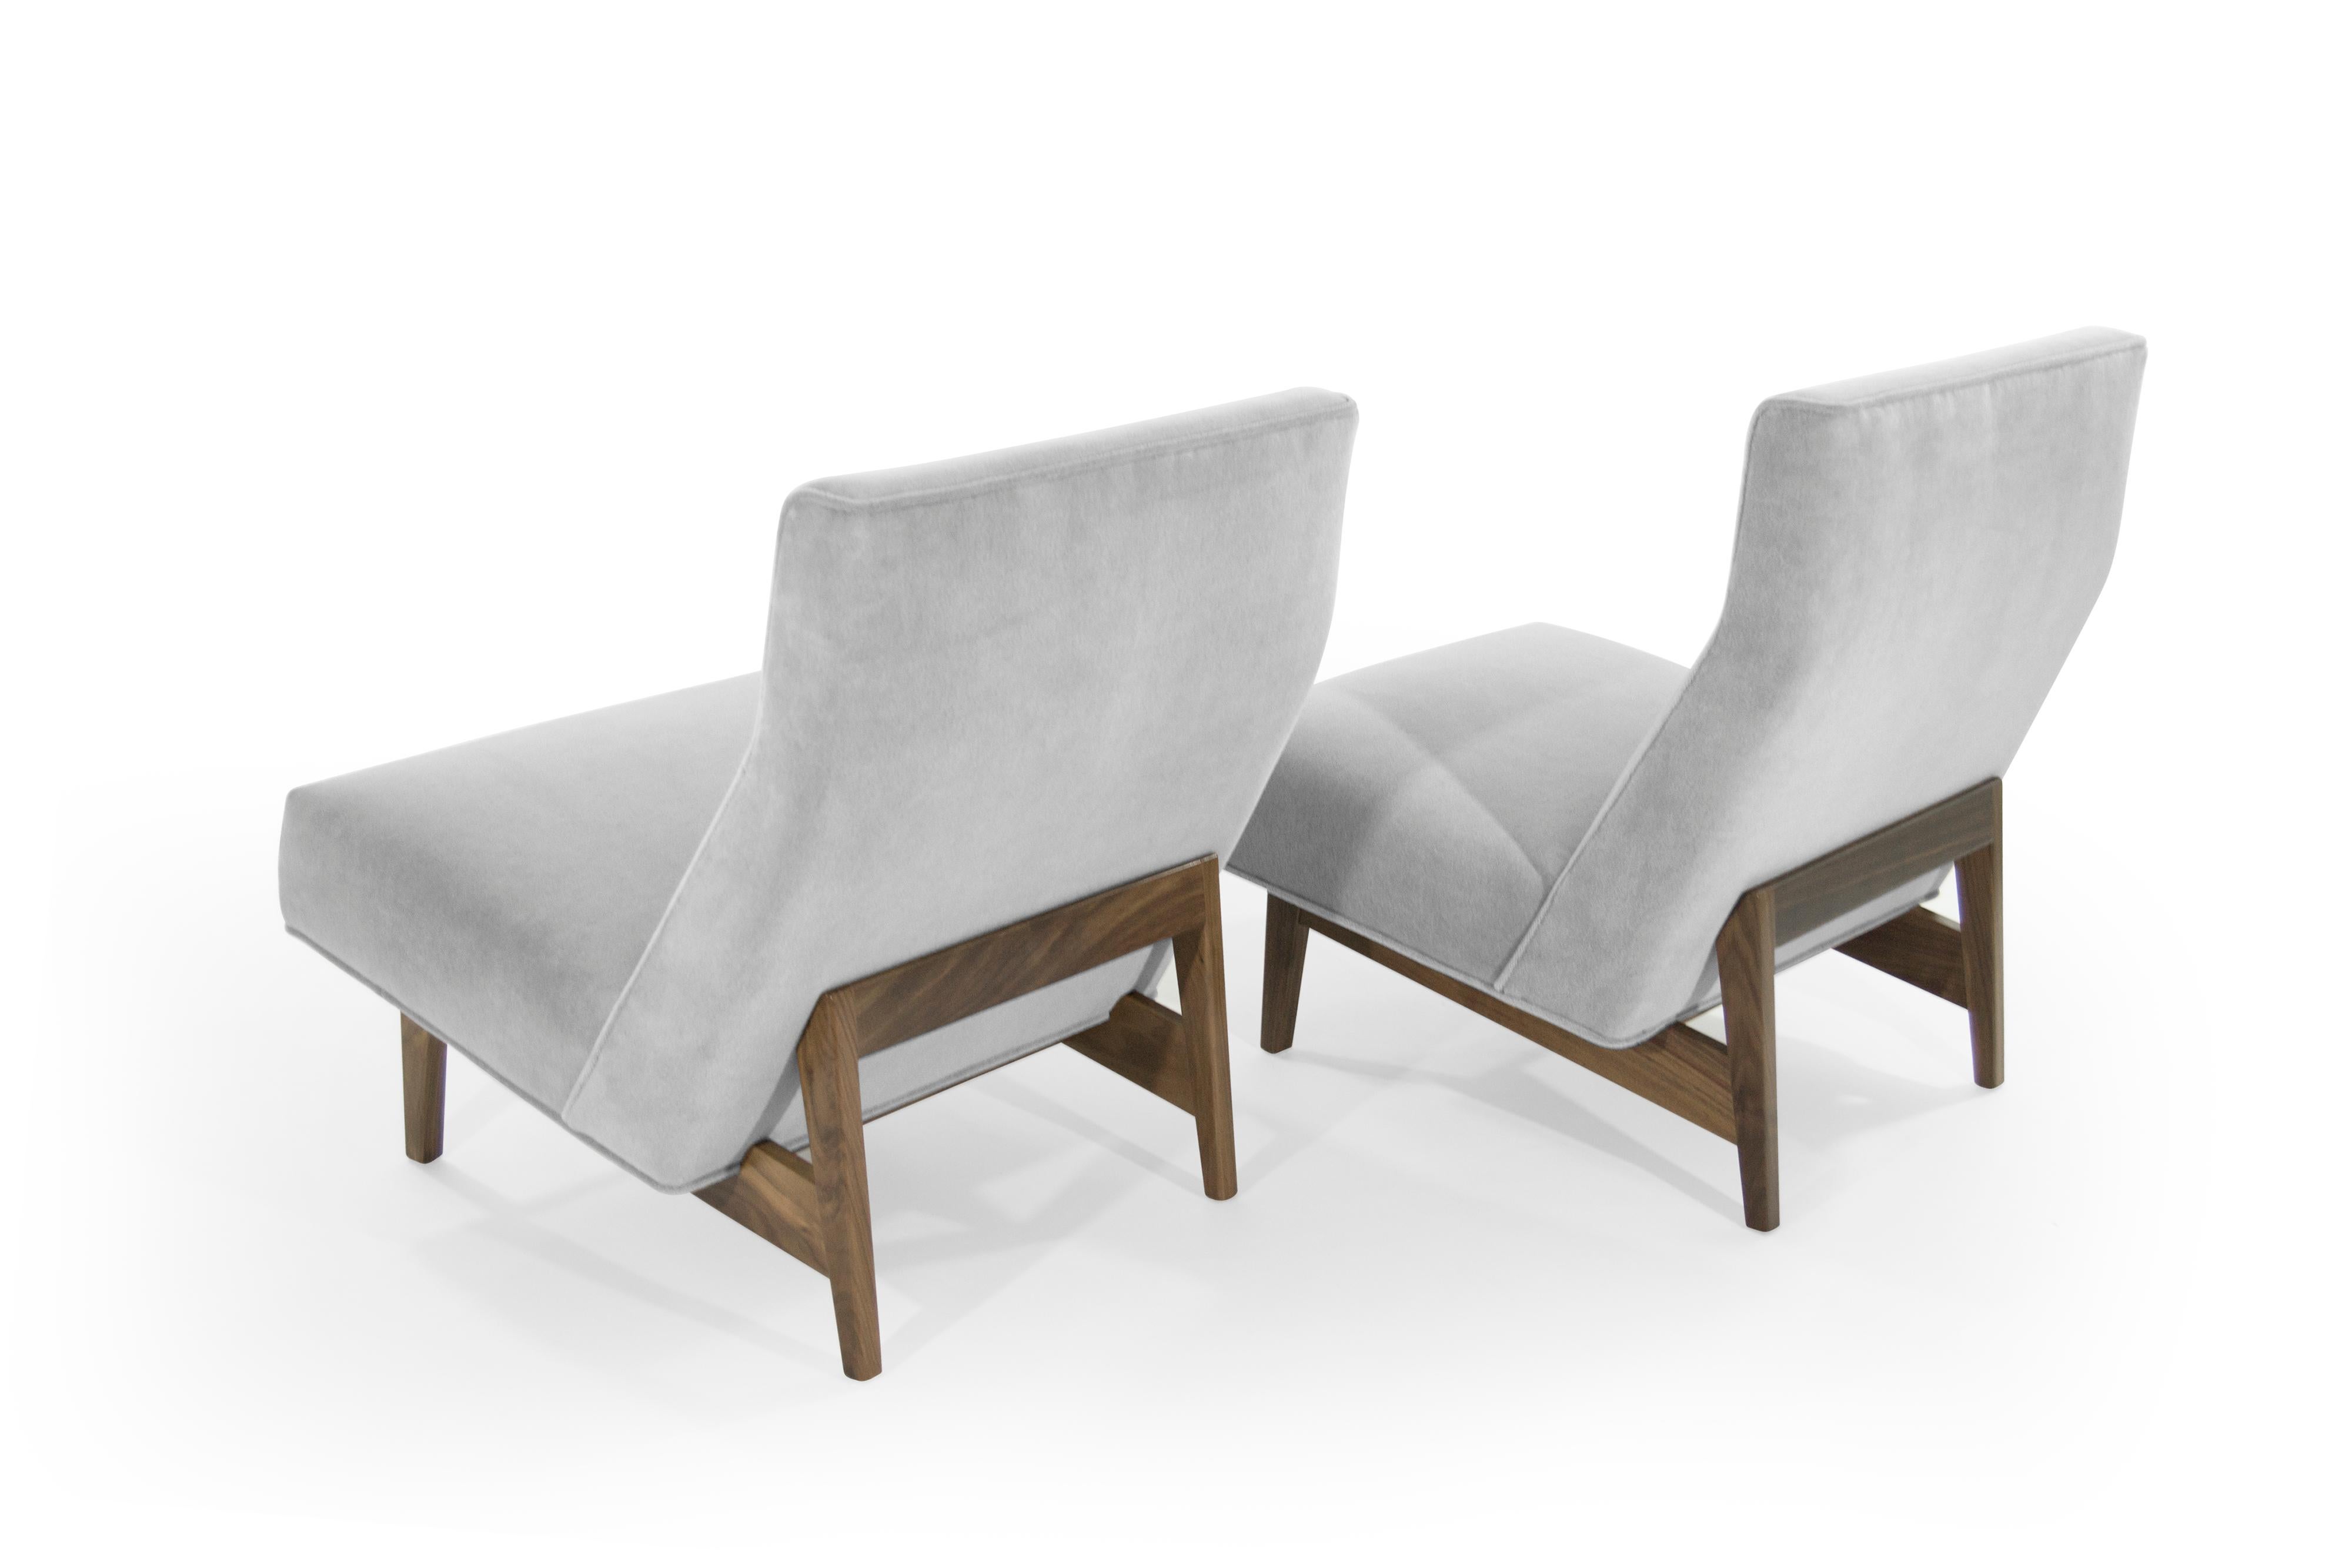 20th Century Classic Slipper Chairs by Jens Risom, circa 1950s